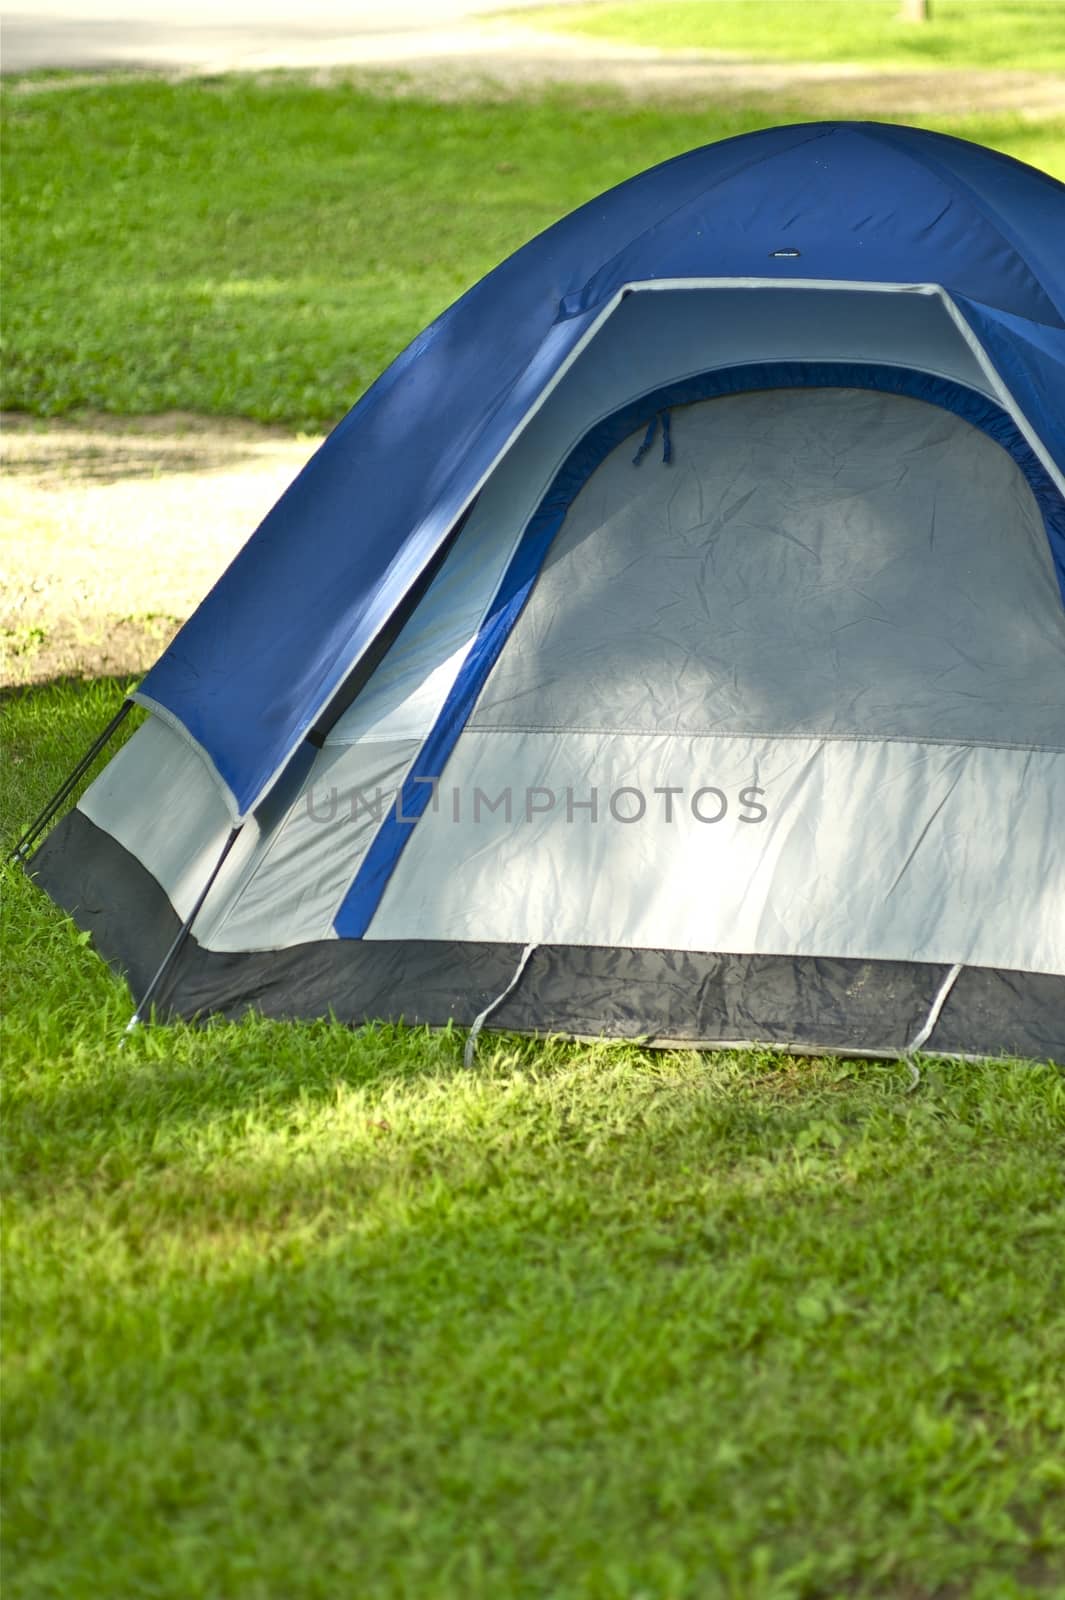 Small Iglo Style Tent on the Campsite. Vertical Outdoor and Lifestyle Photography